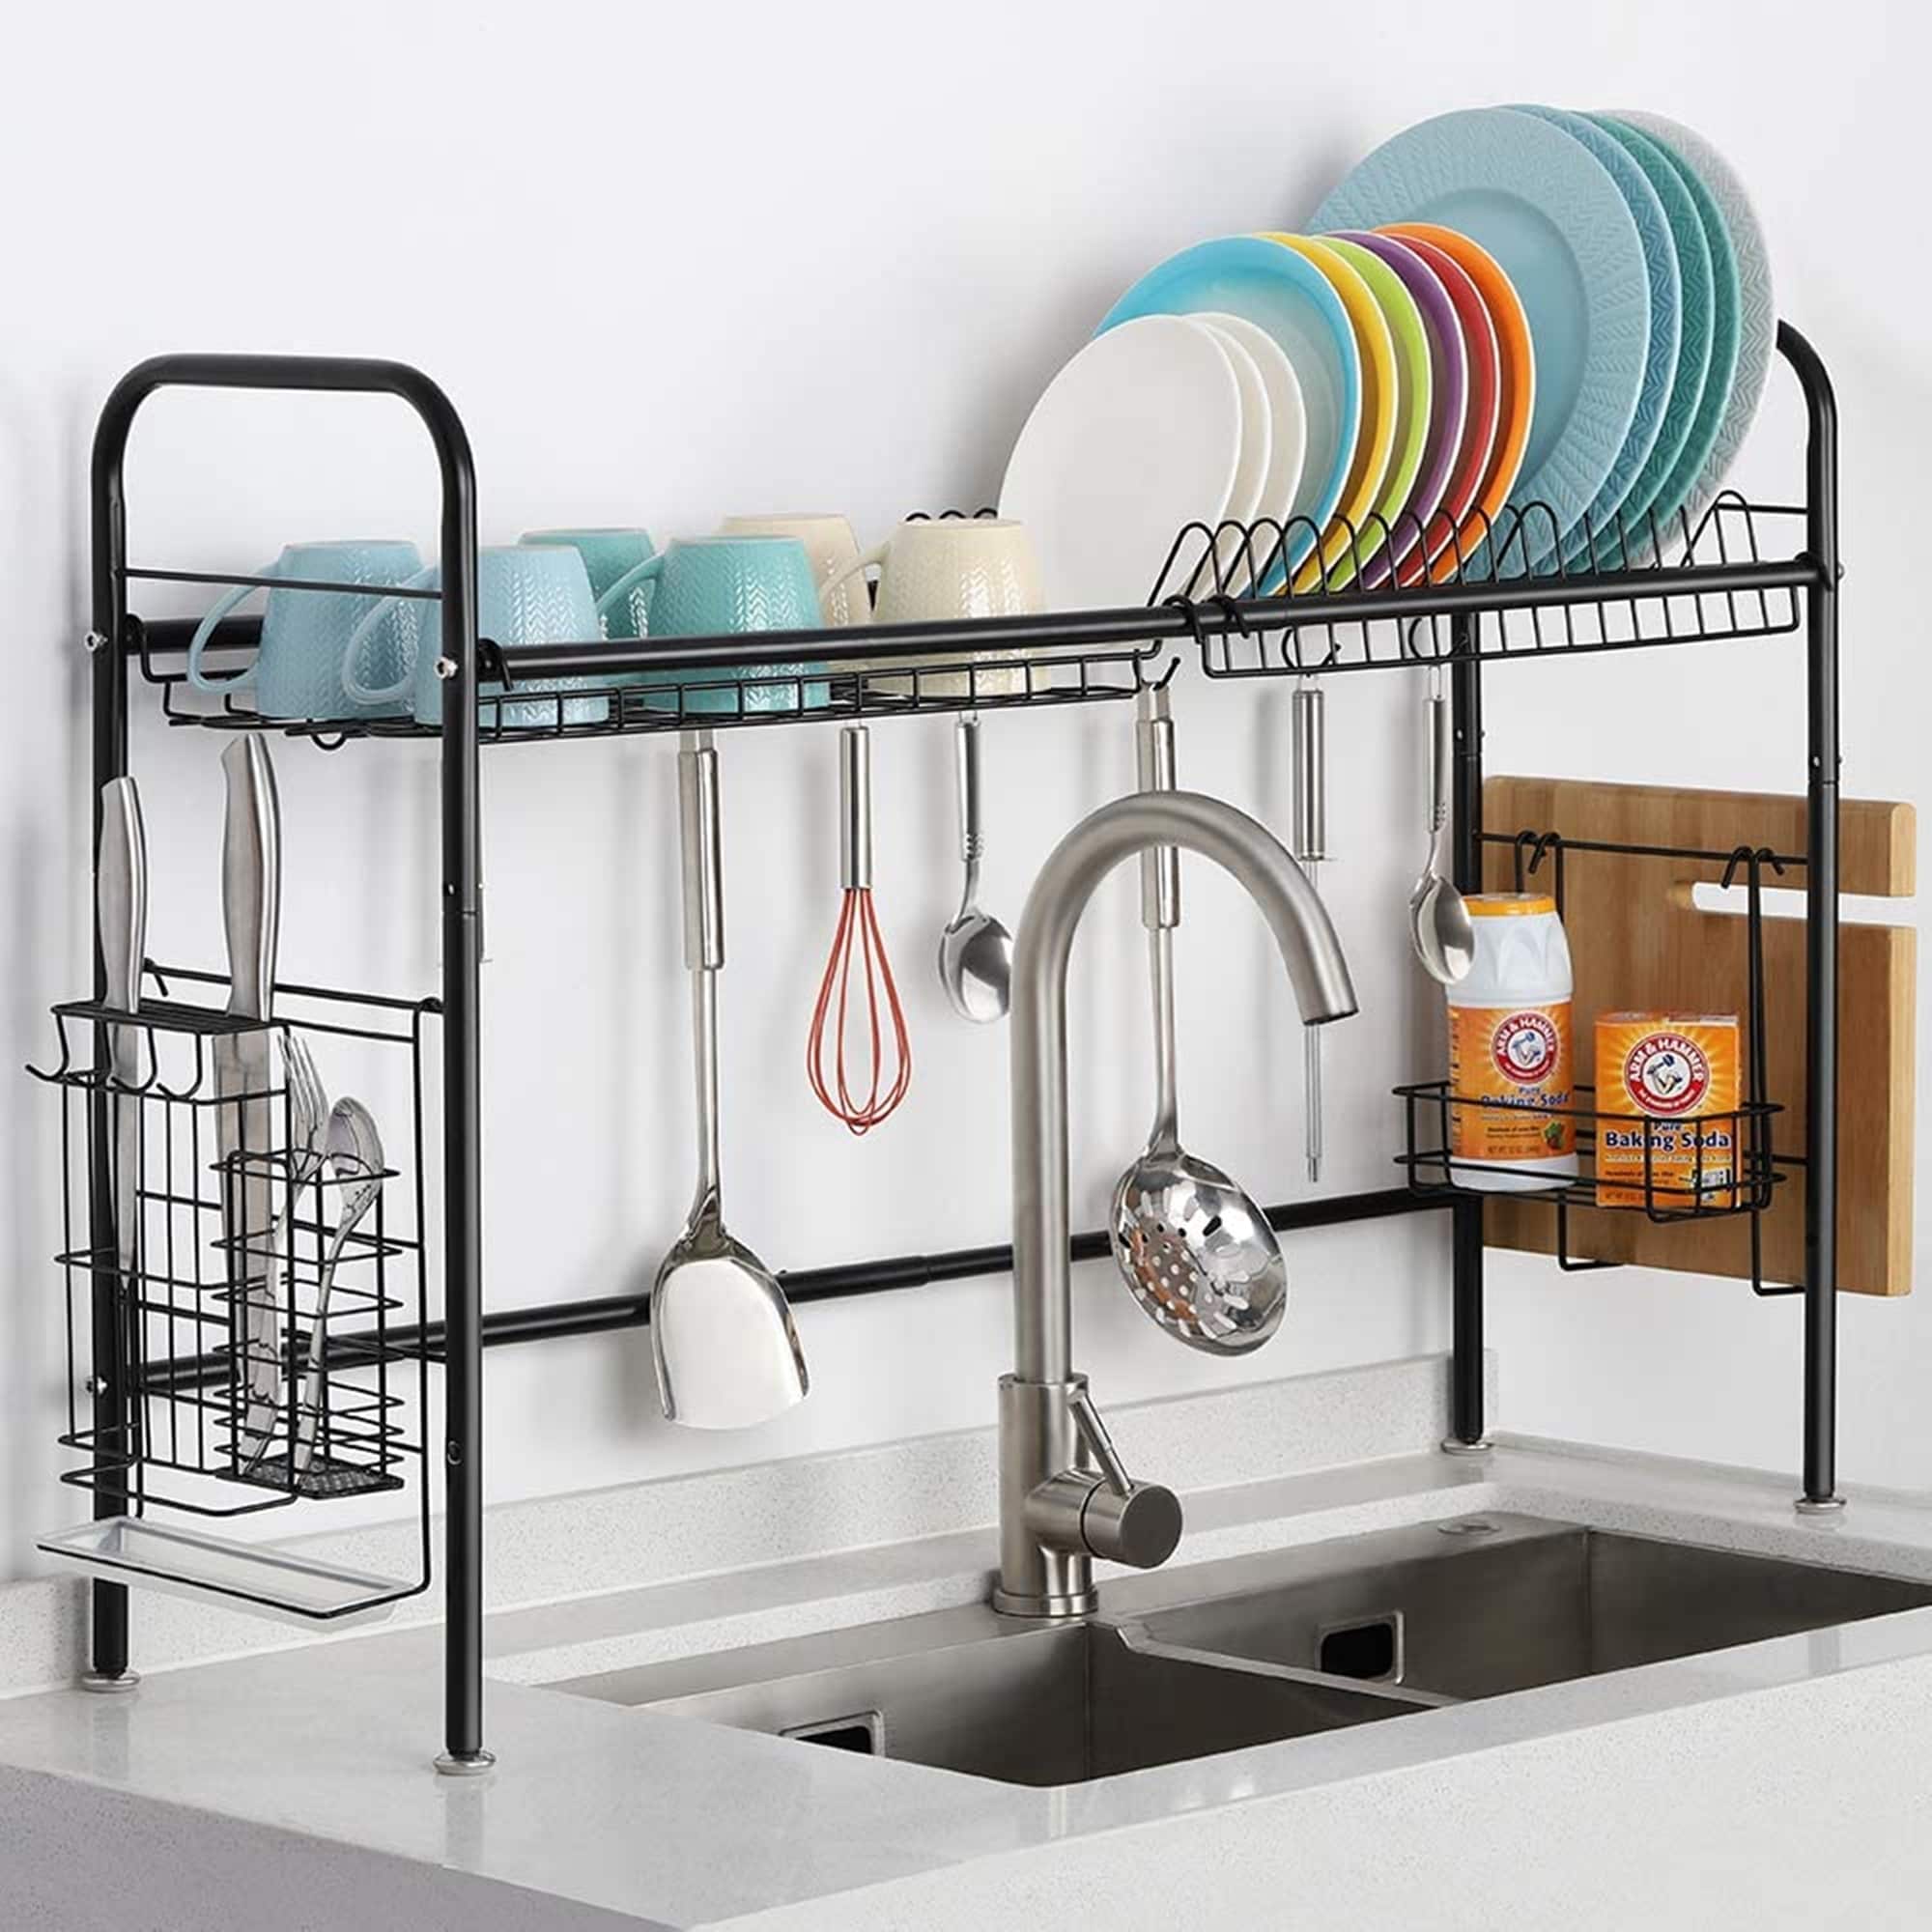 https://ak1.ostkcdn.com/images/products/is/images/direct/f58b240f7eea03ab4d58dc18fdc78ba0f6e9ab8f/Dish-Drying-Rack-Over-the-Sink-Kitchen-Sink-Organizer%2C-Stainless-Steel.jpg